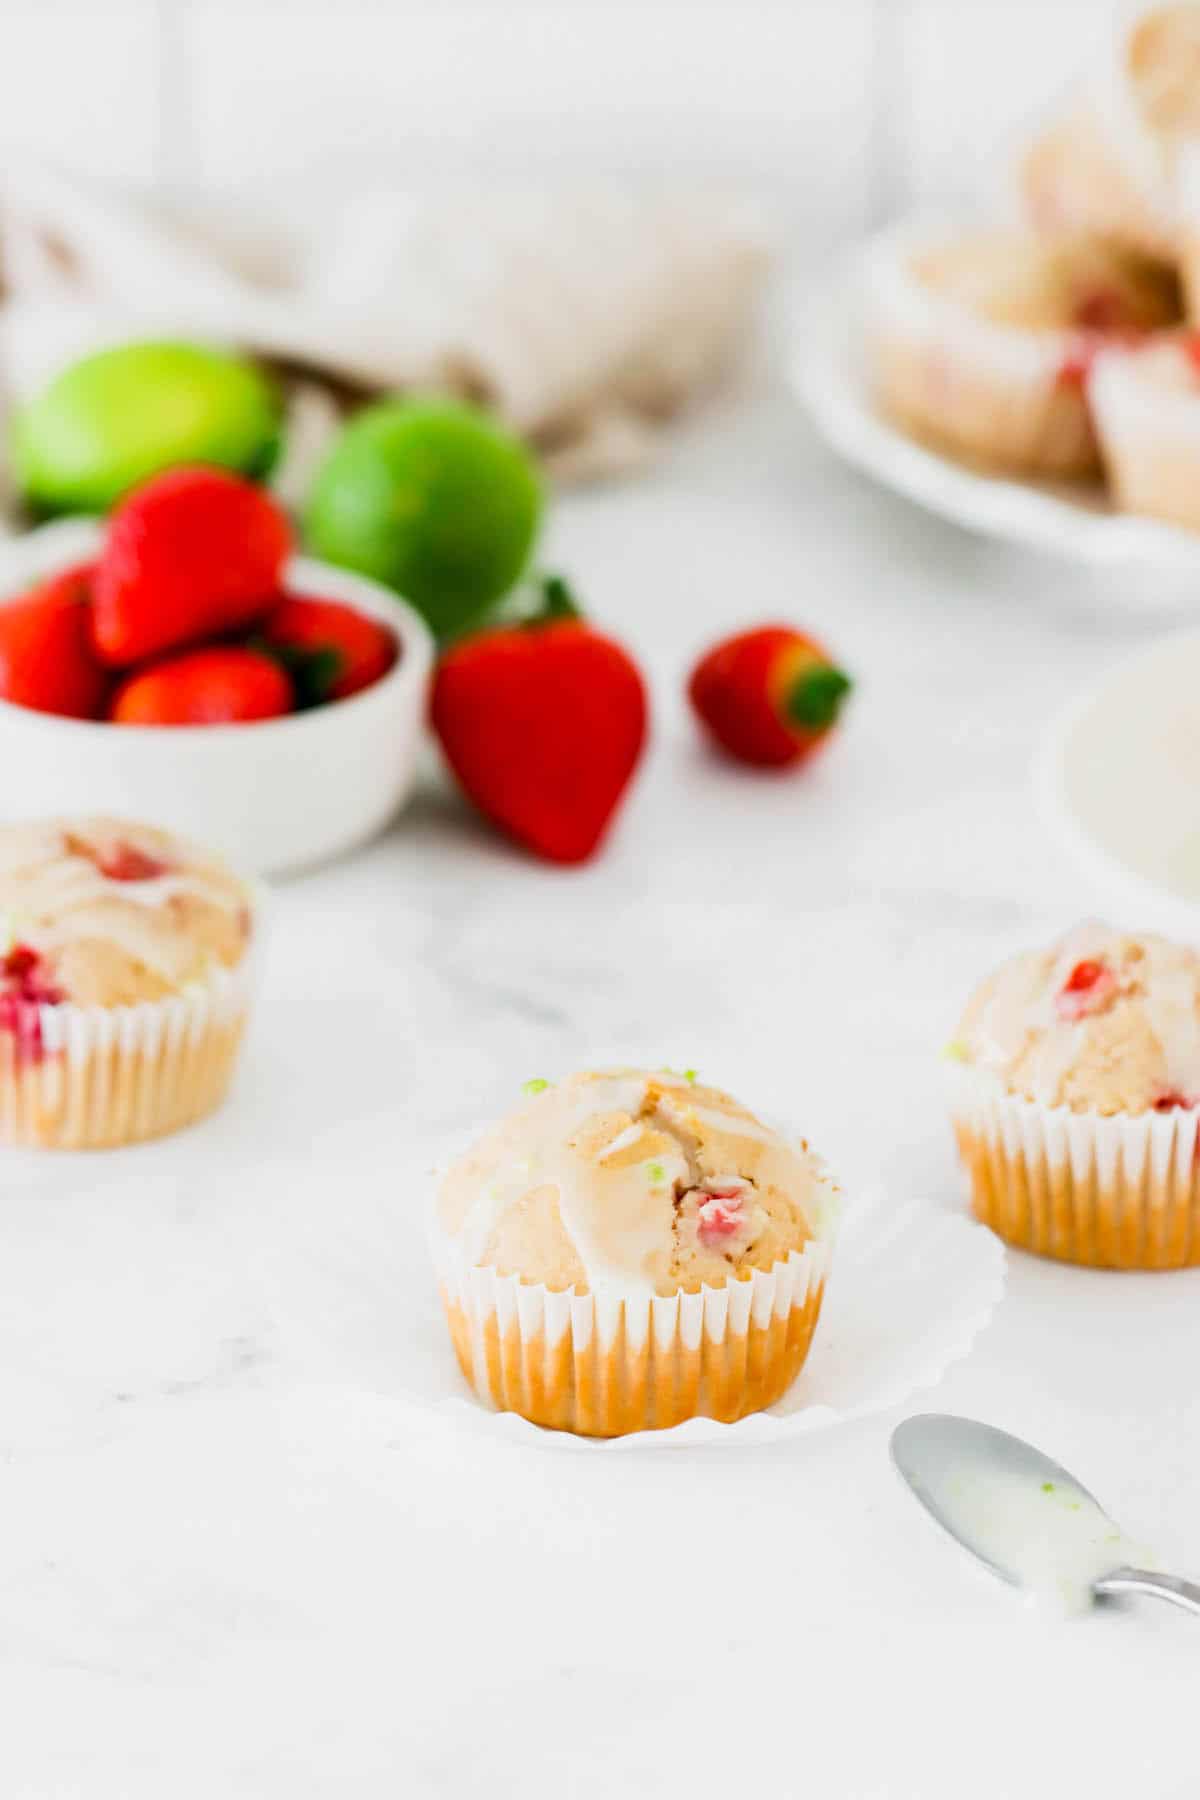 Three strawberry muffins with a bowl of strawberries in the background